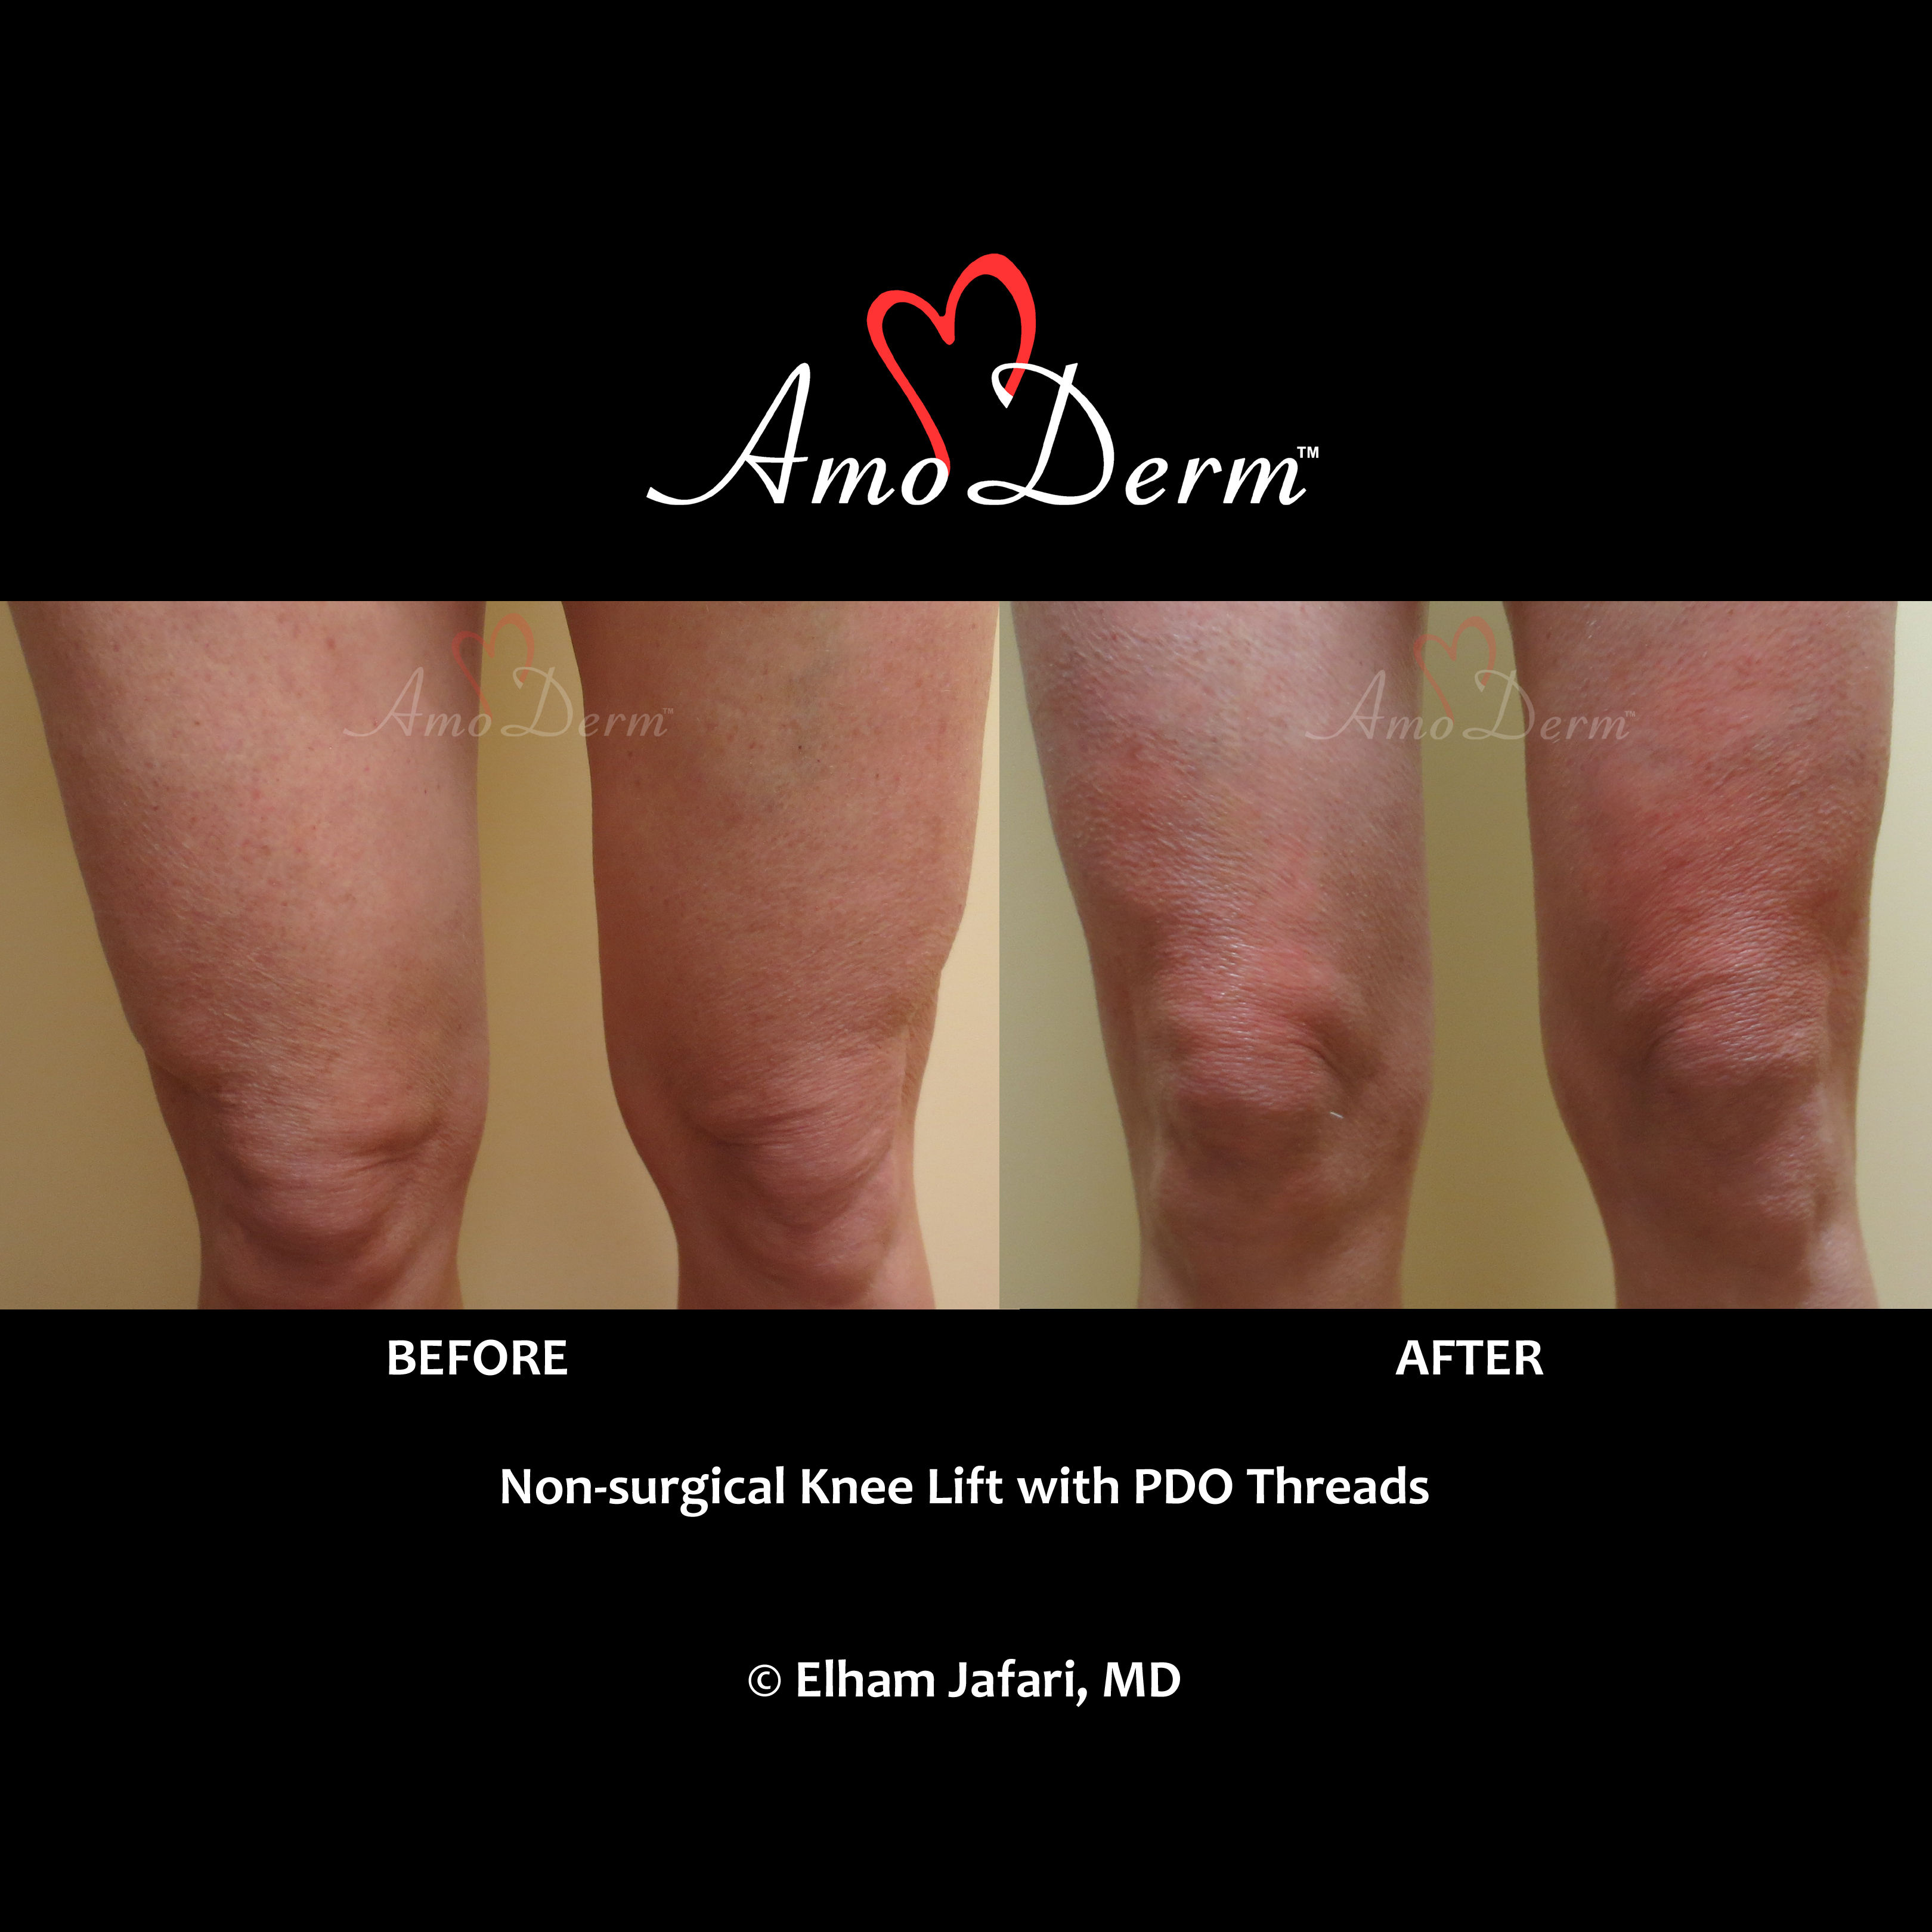 Non-Surgical Knee Lift with PDO Threads